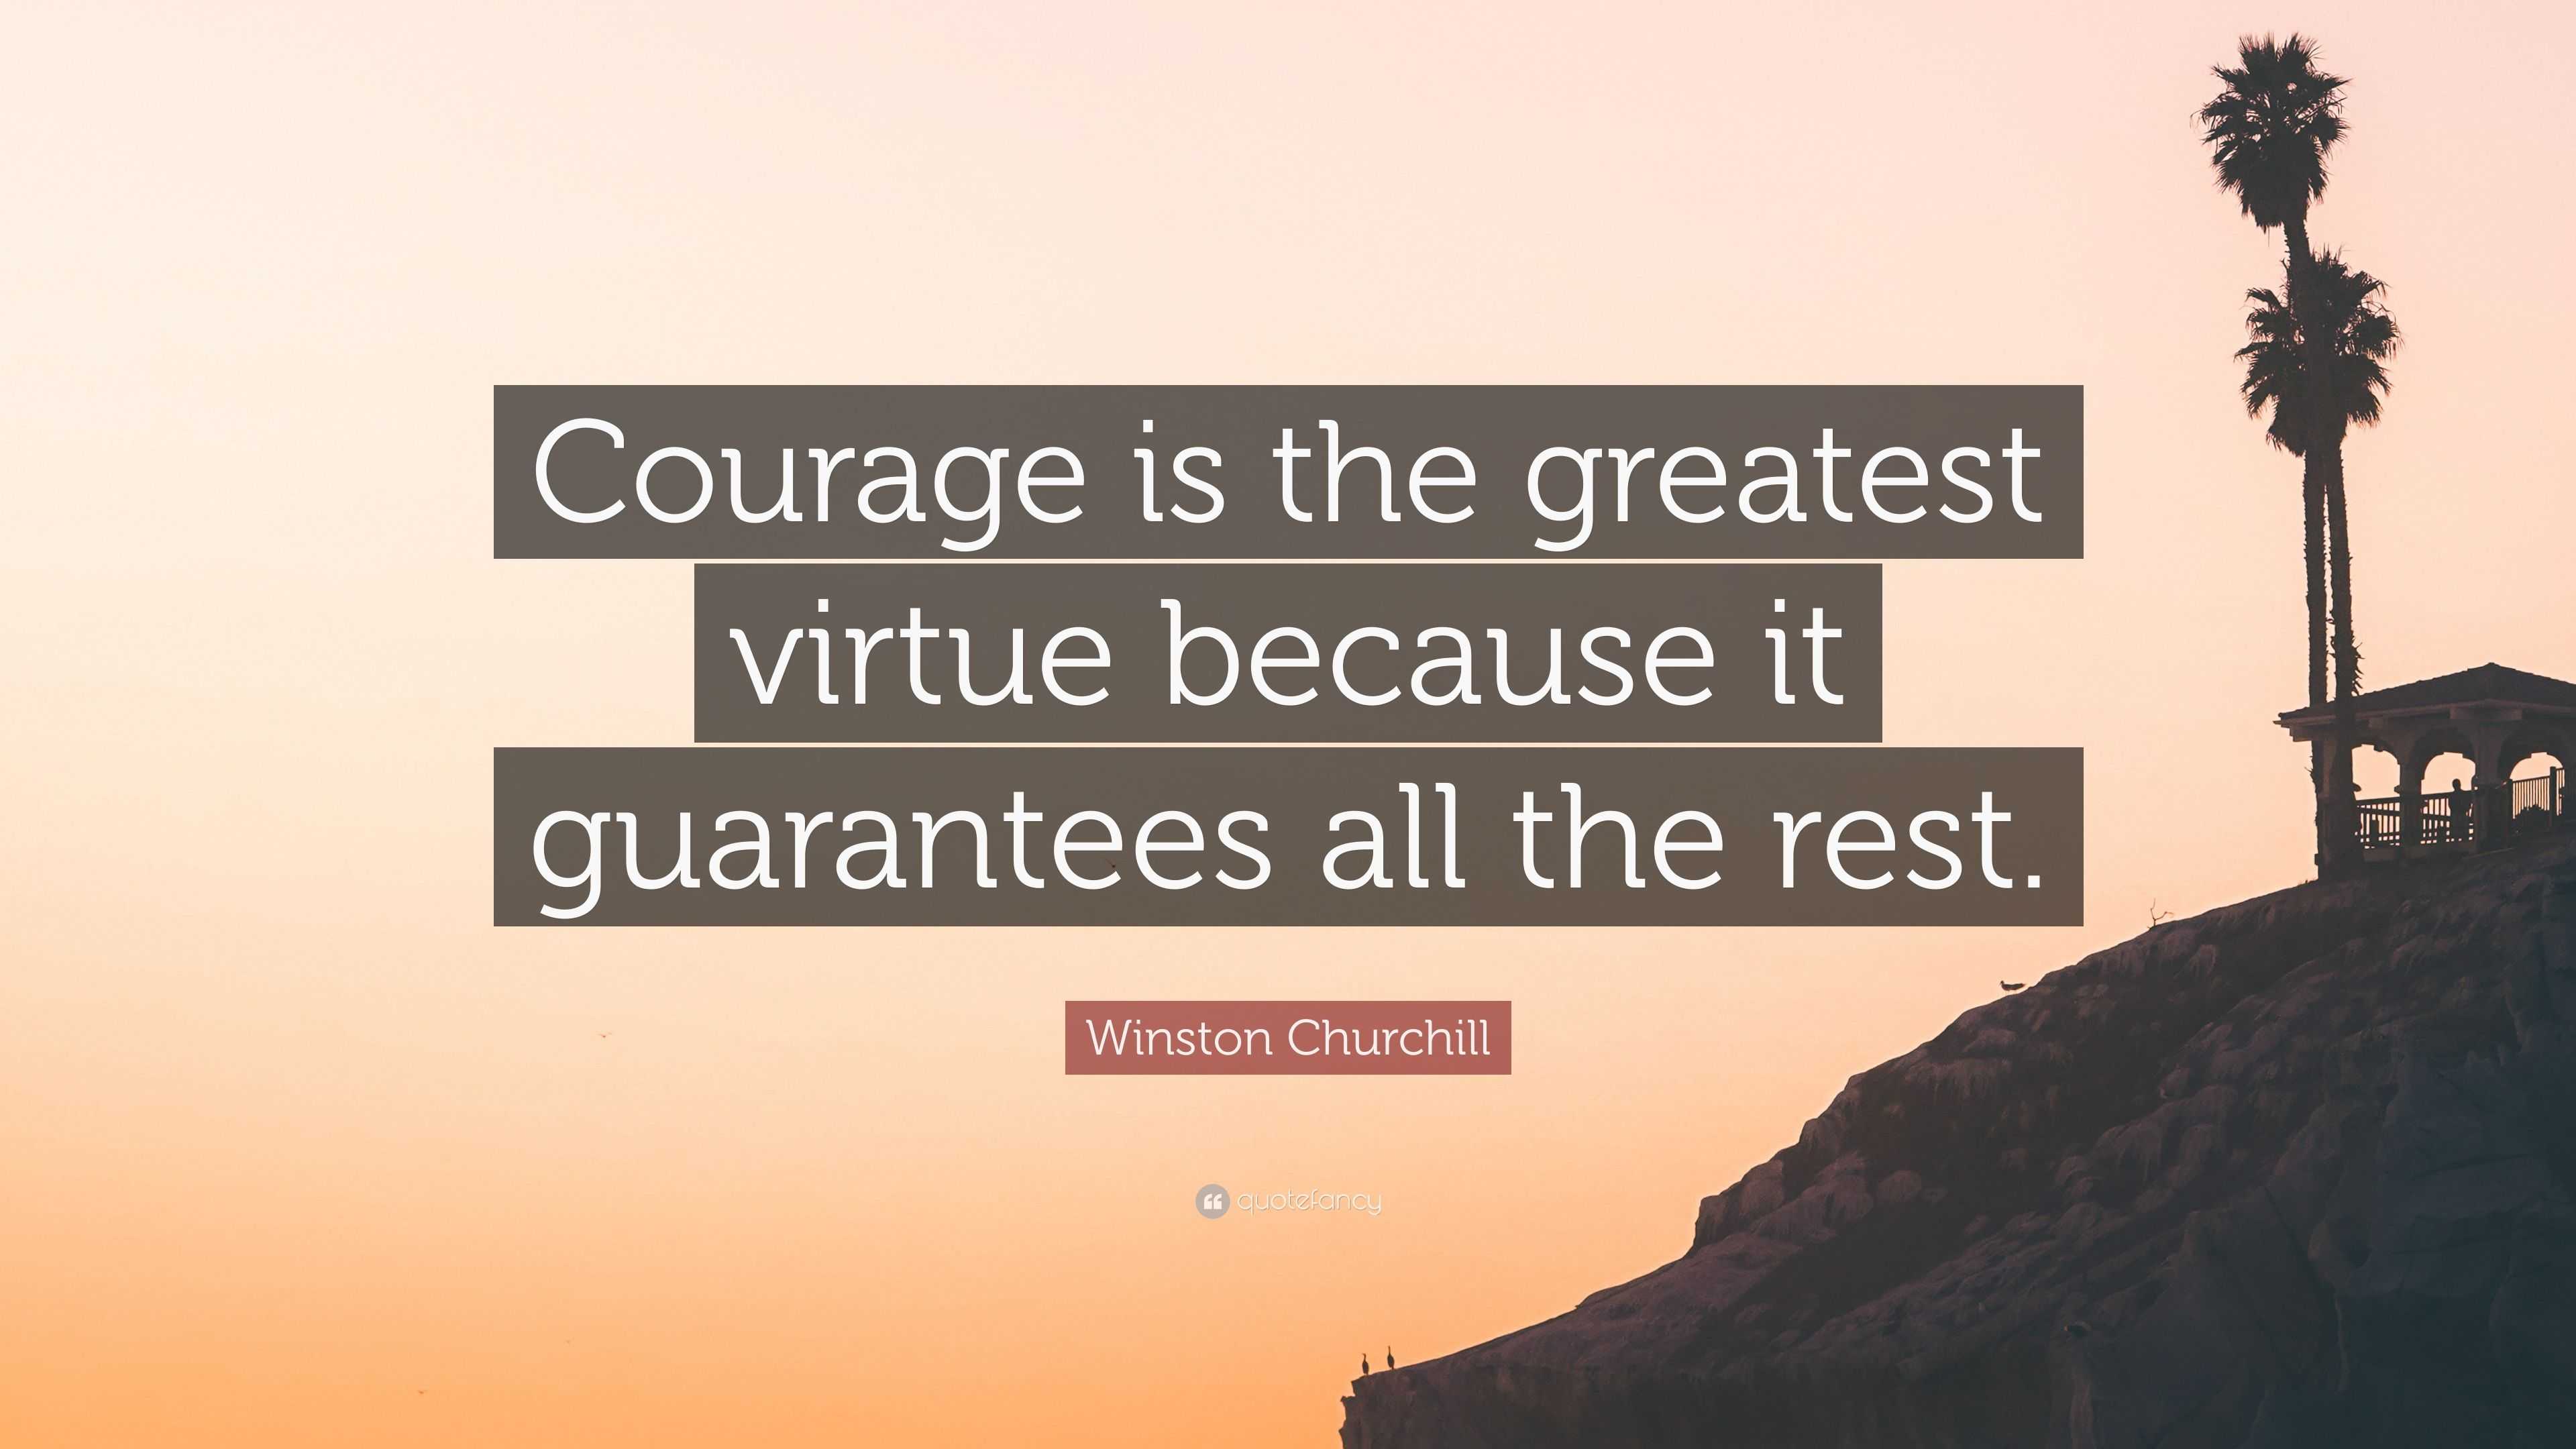 Winston Churchill Quote: “Courage is the greatest virtue because it ...